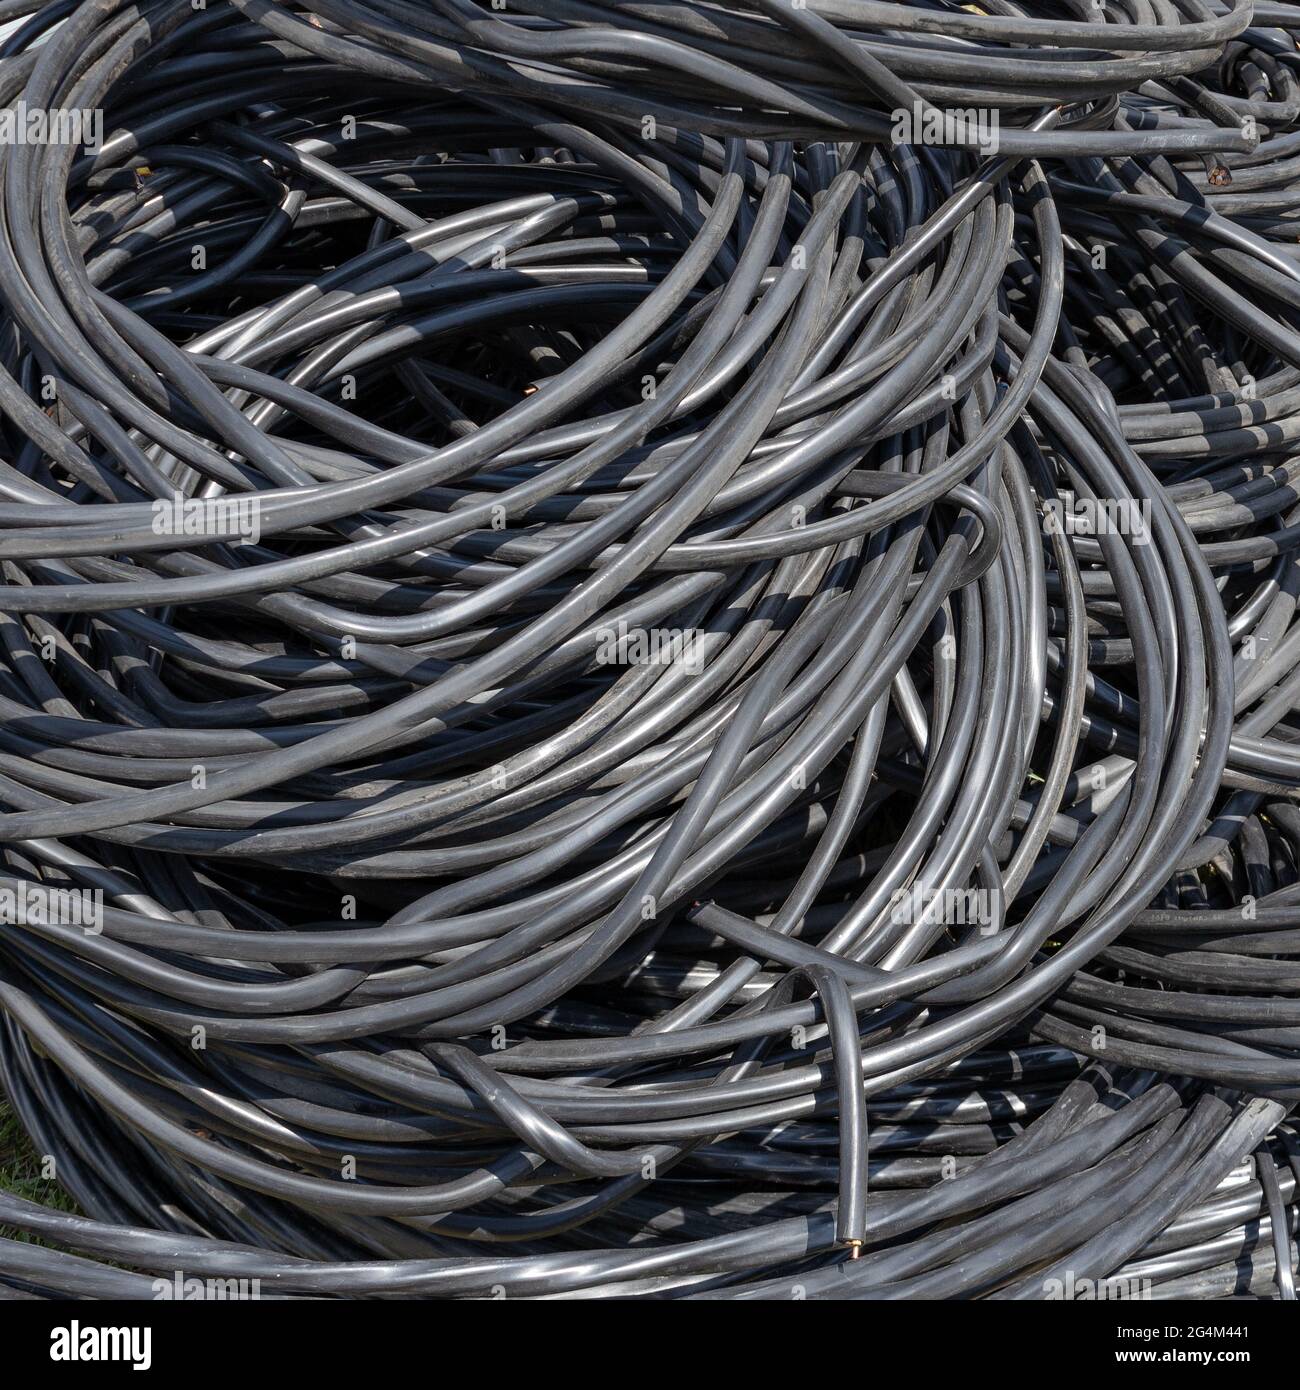 A twisted copper wire in black plastic insulation lies in a pile. Electrification and automation of systems. Consumable material. Stock Photo